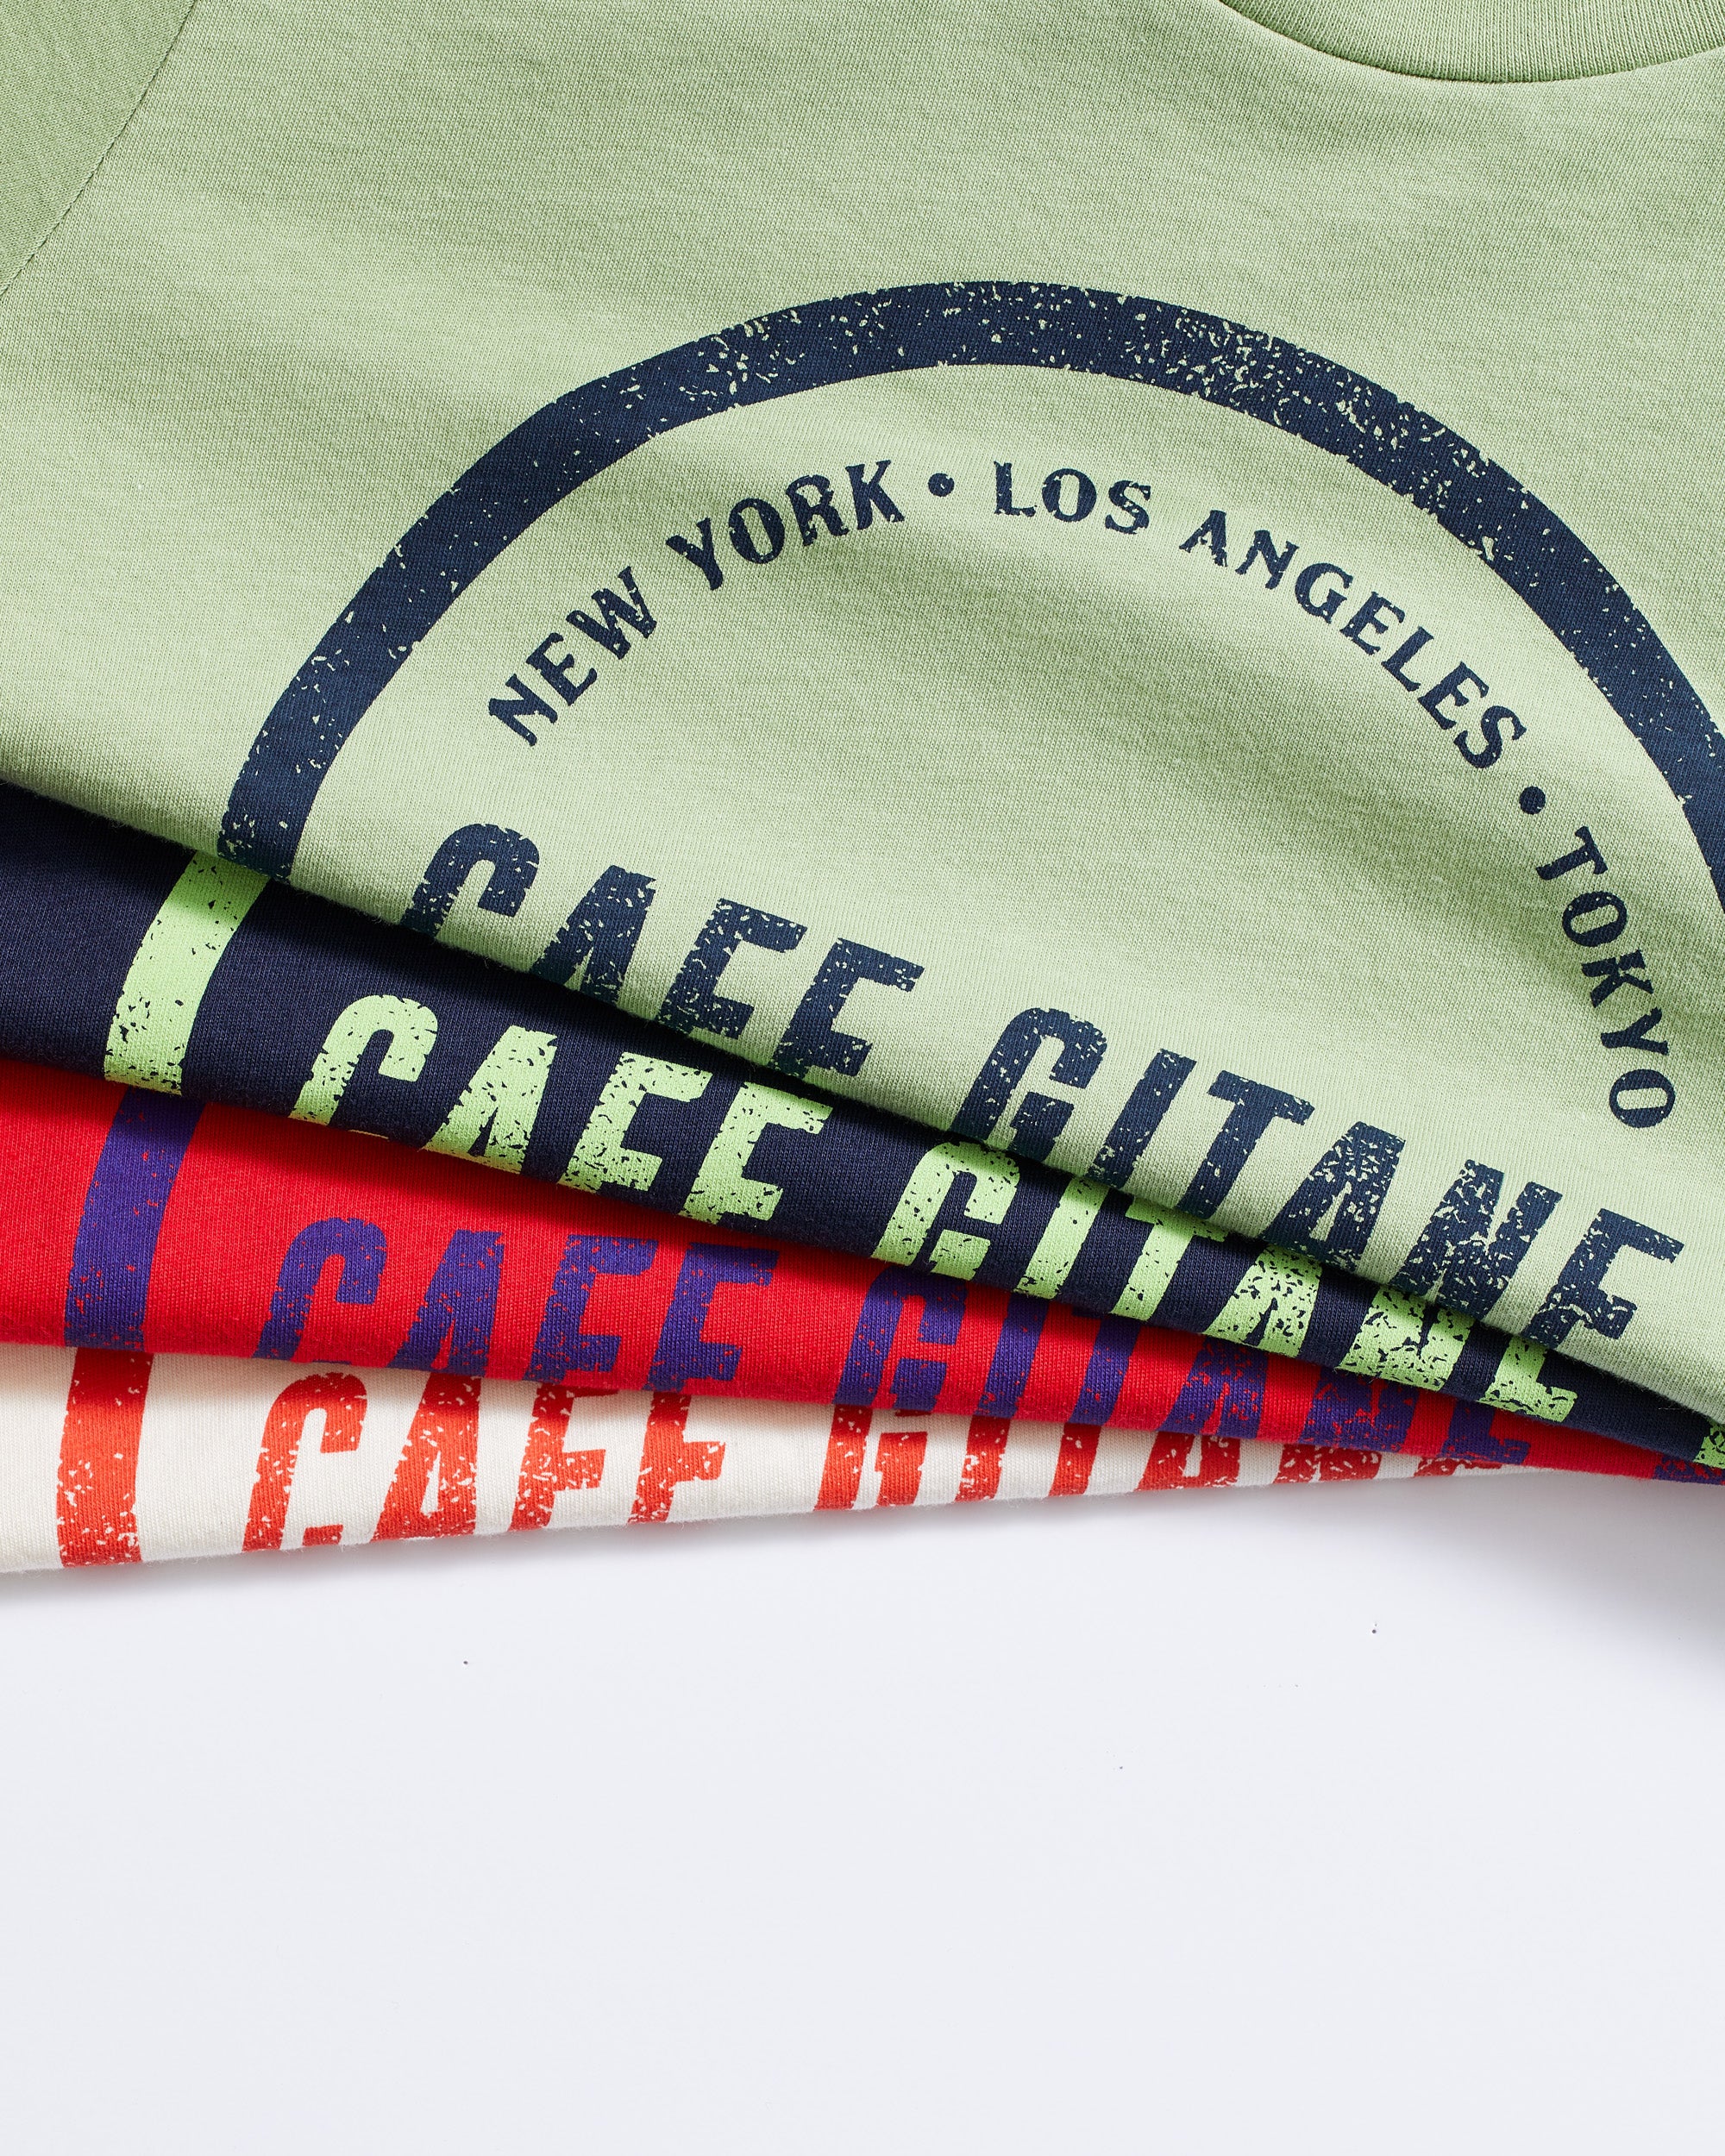 The Cafe Gitane Stamped Logo Tee is 100% organic cotton and made in the USA. The classic t-shirt come in green, red , navy, and natural and is printed with the logo in a stamped structure. The print ins circular in the middle of the front chest. The logo features each city Cafe Gitane has a location in: New York, Los Angeles, and Tokyo, as well as when the first location opened: 1994. 